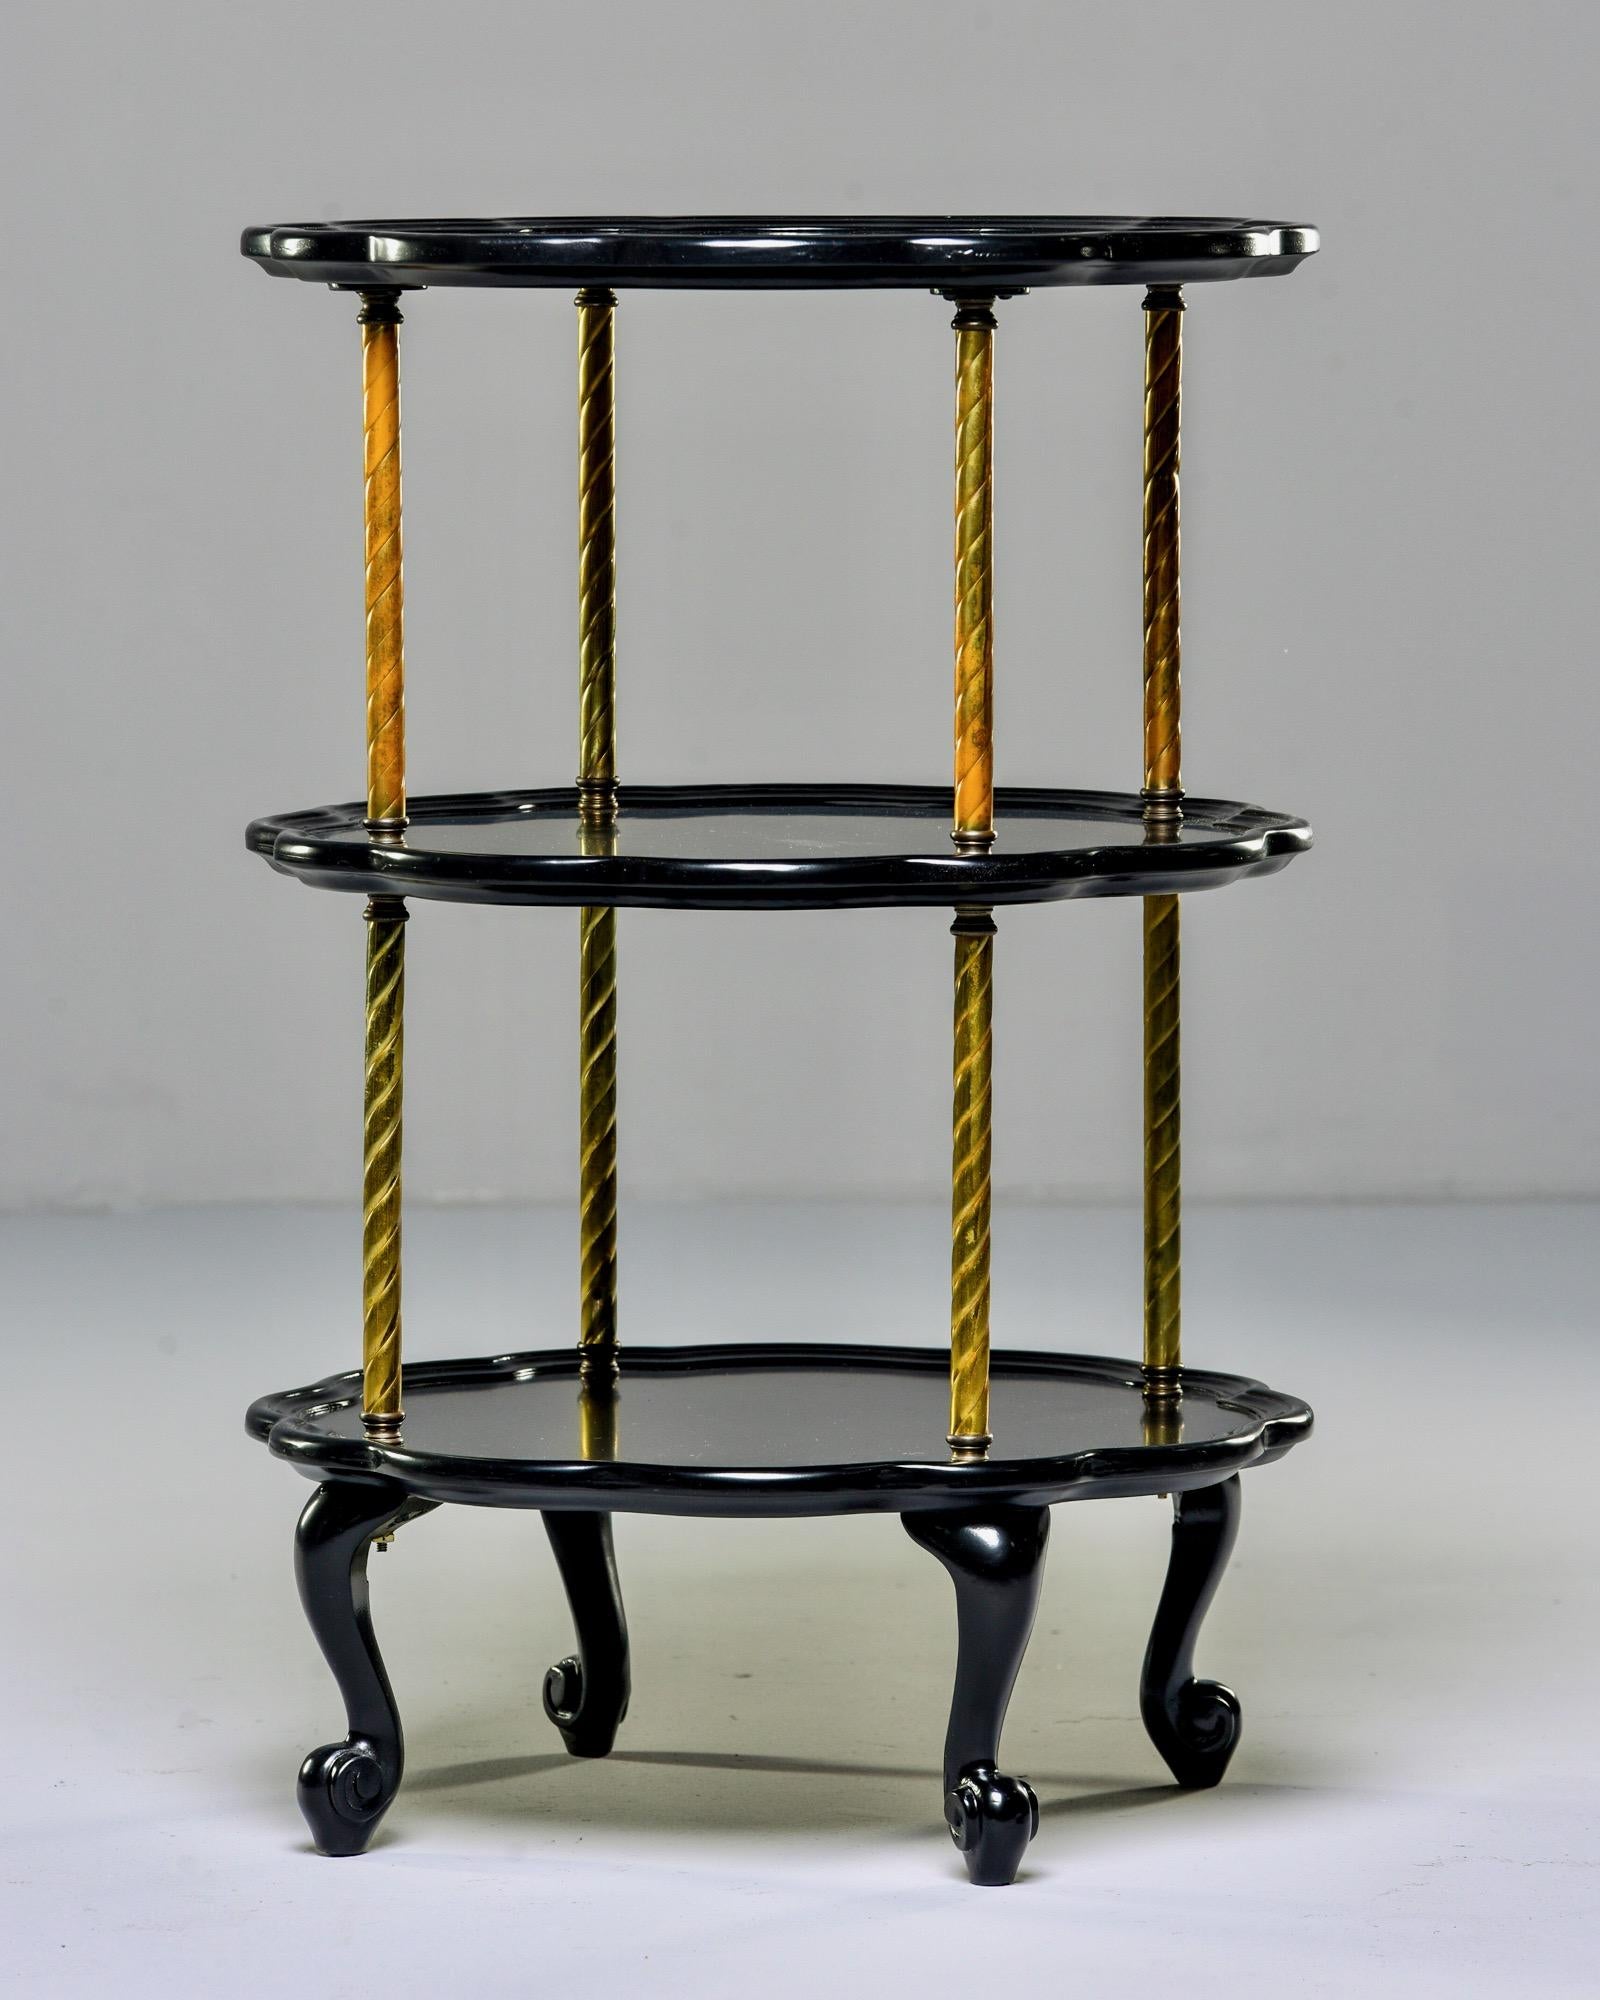 French side table has three oval tiers with curved feet, brass supports and new ebonized finish, circa 1910. Unknown maker.